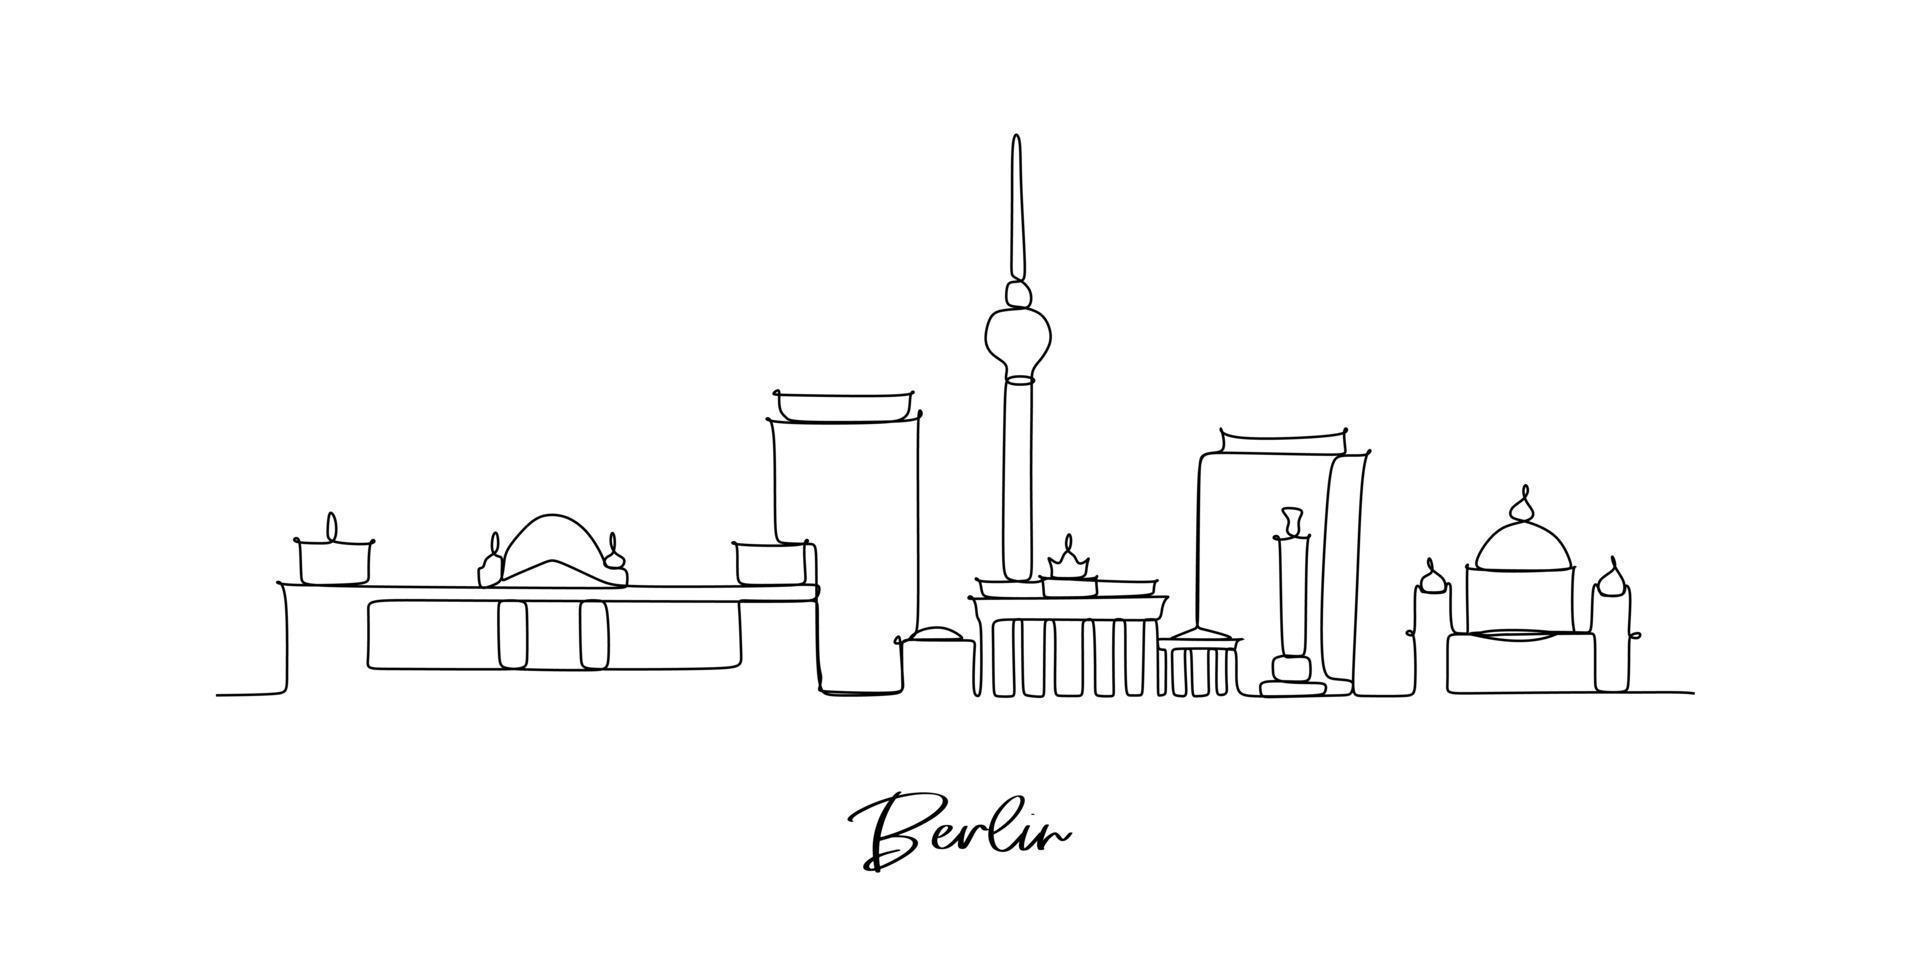 Berlin Germany landmark skyline - continuous one line drawing vector